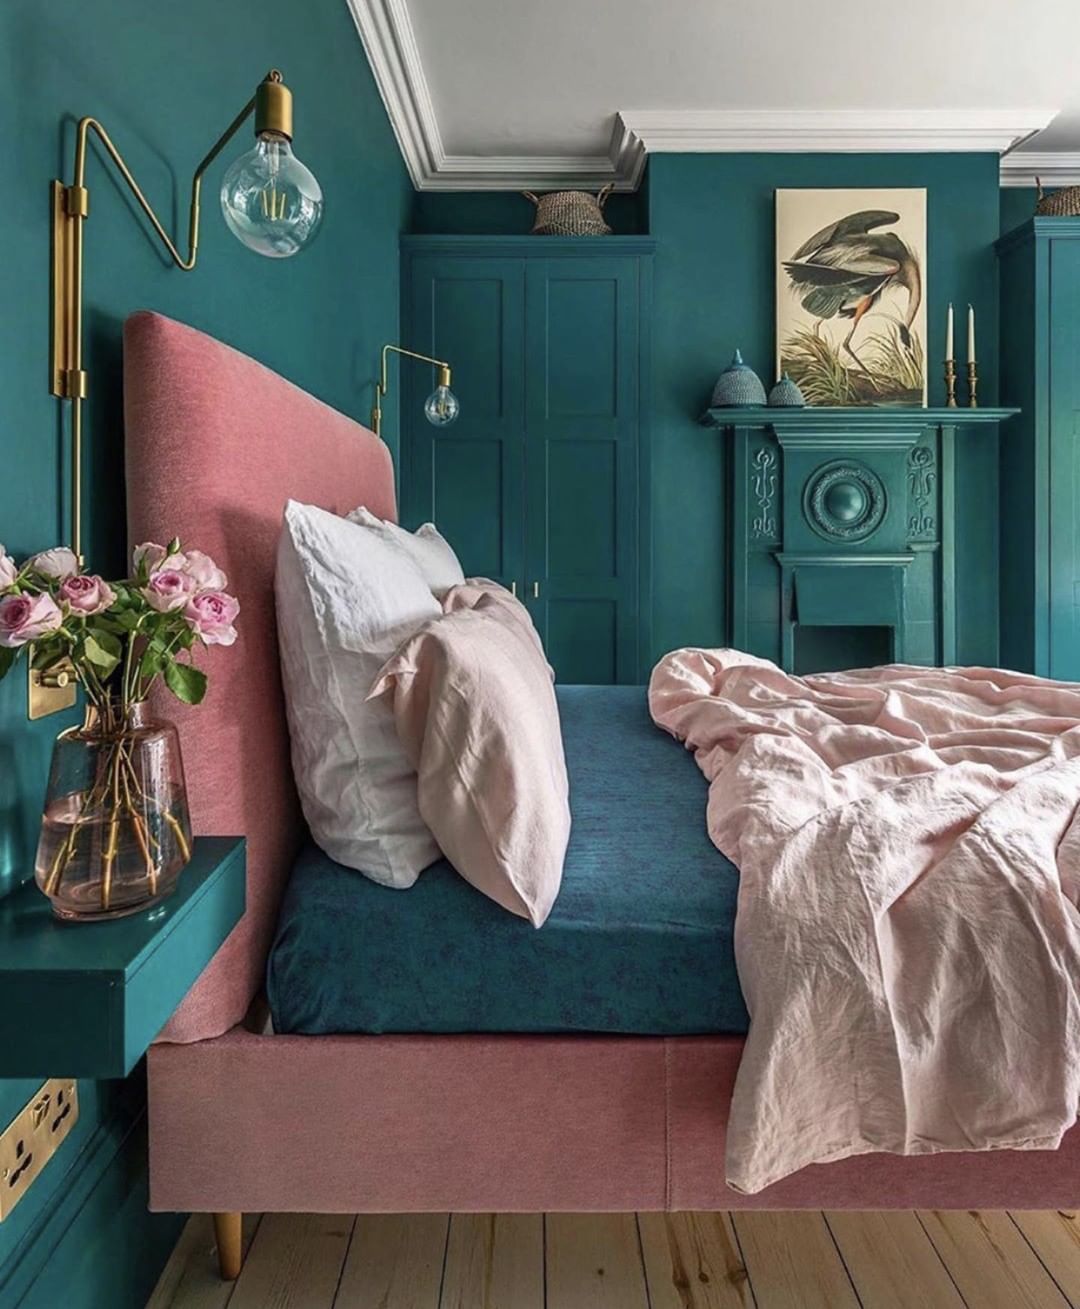 Teal Tranquility: Bedroom with Pink and Teal Harmony